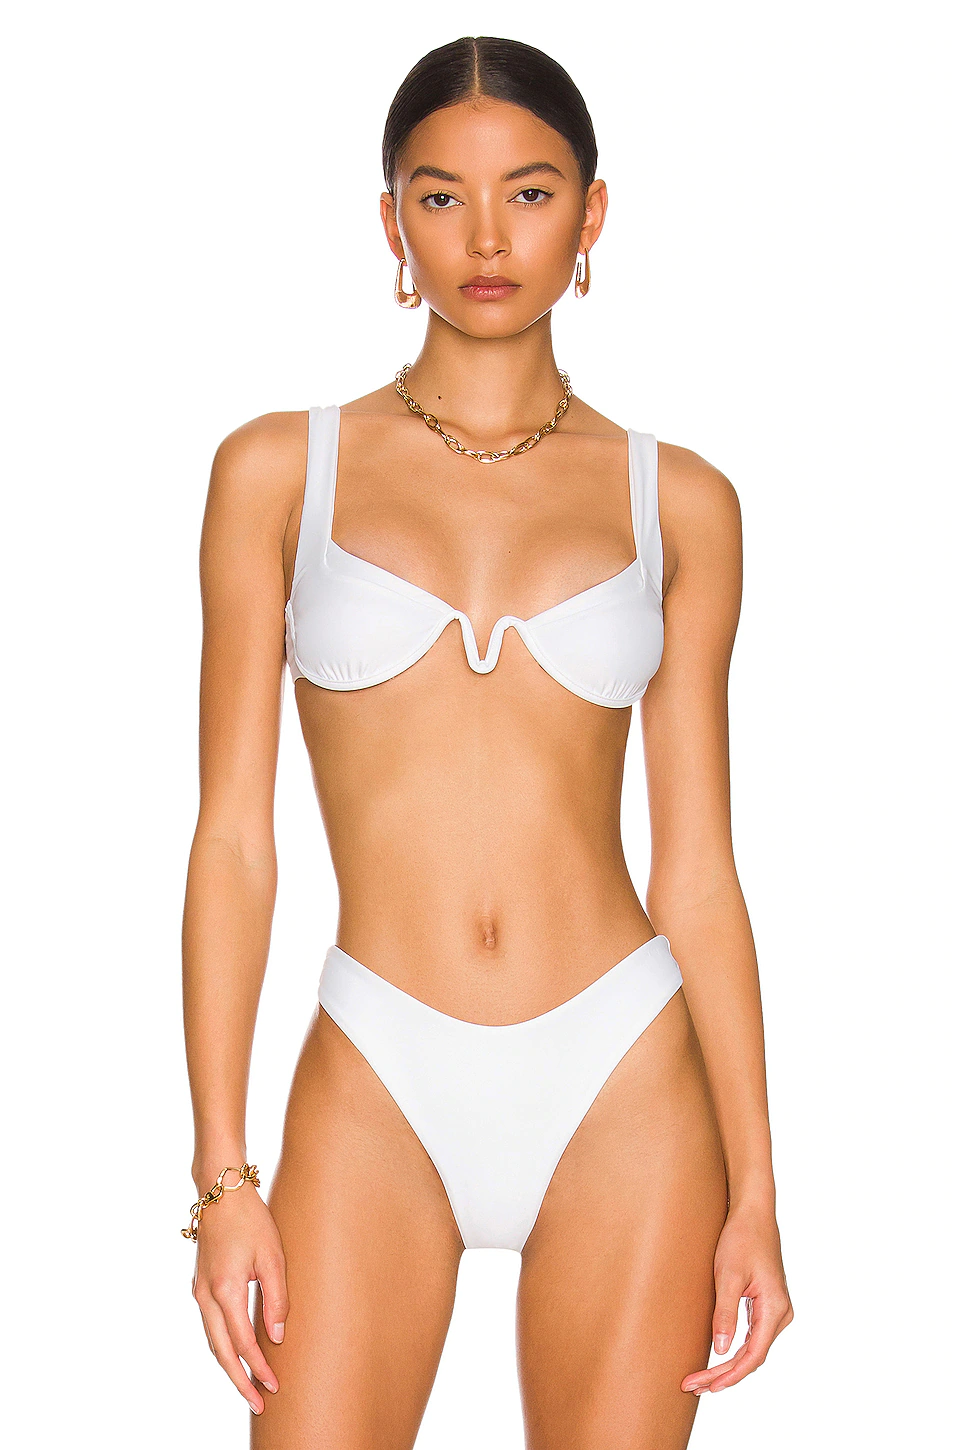 If You Have A Small Bust, I Just Found Your New Favorite Swimsuit